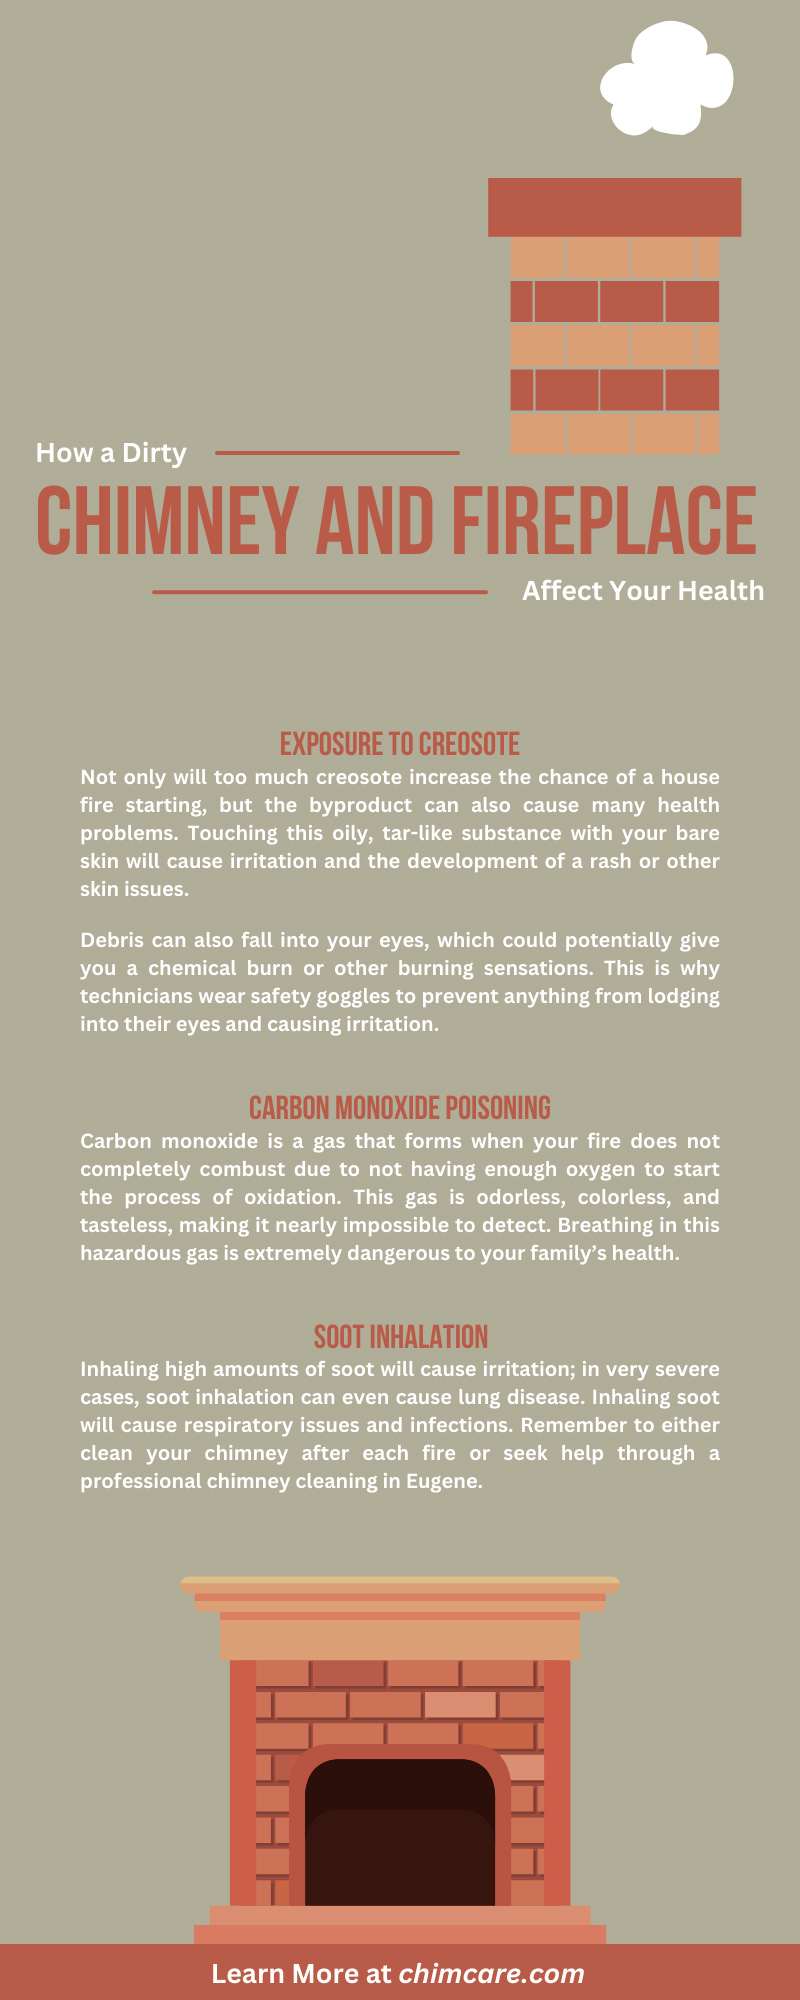 How a Dirty Chimney and Fireplace Affect Your Health